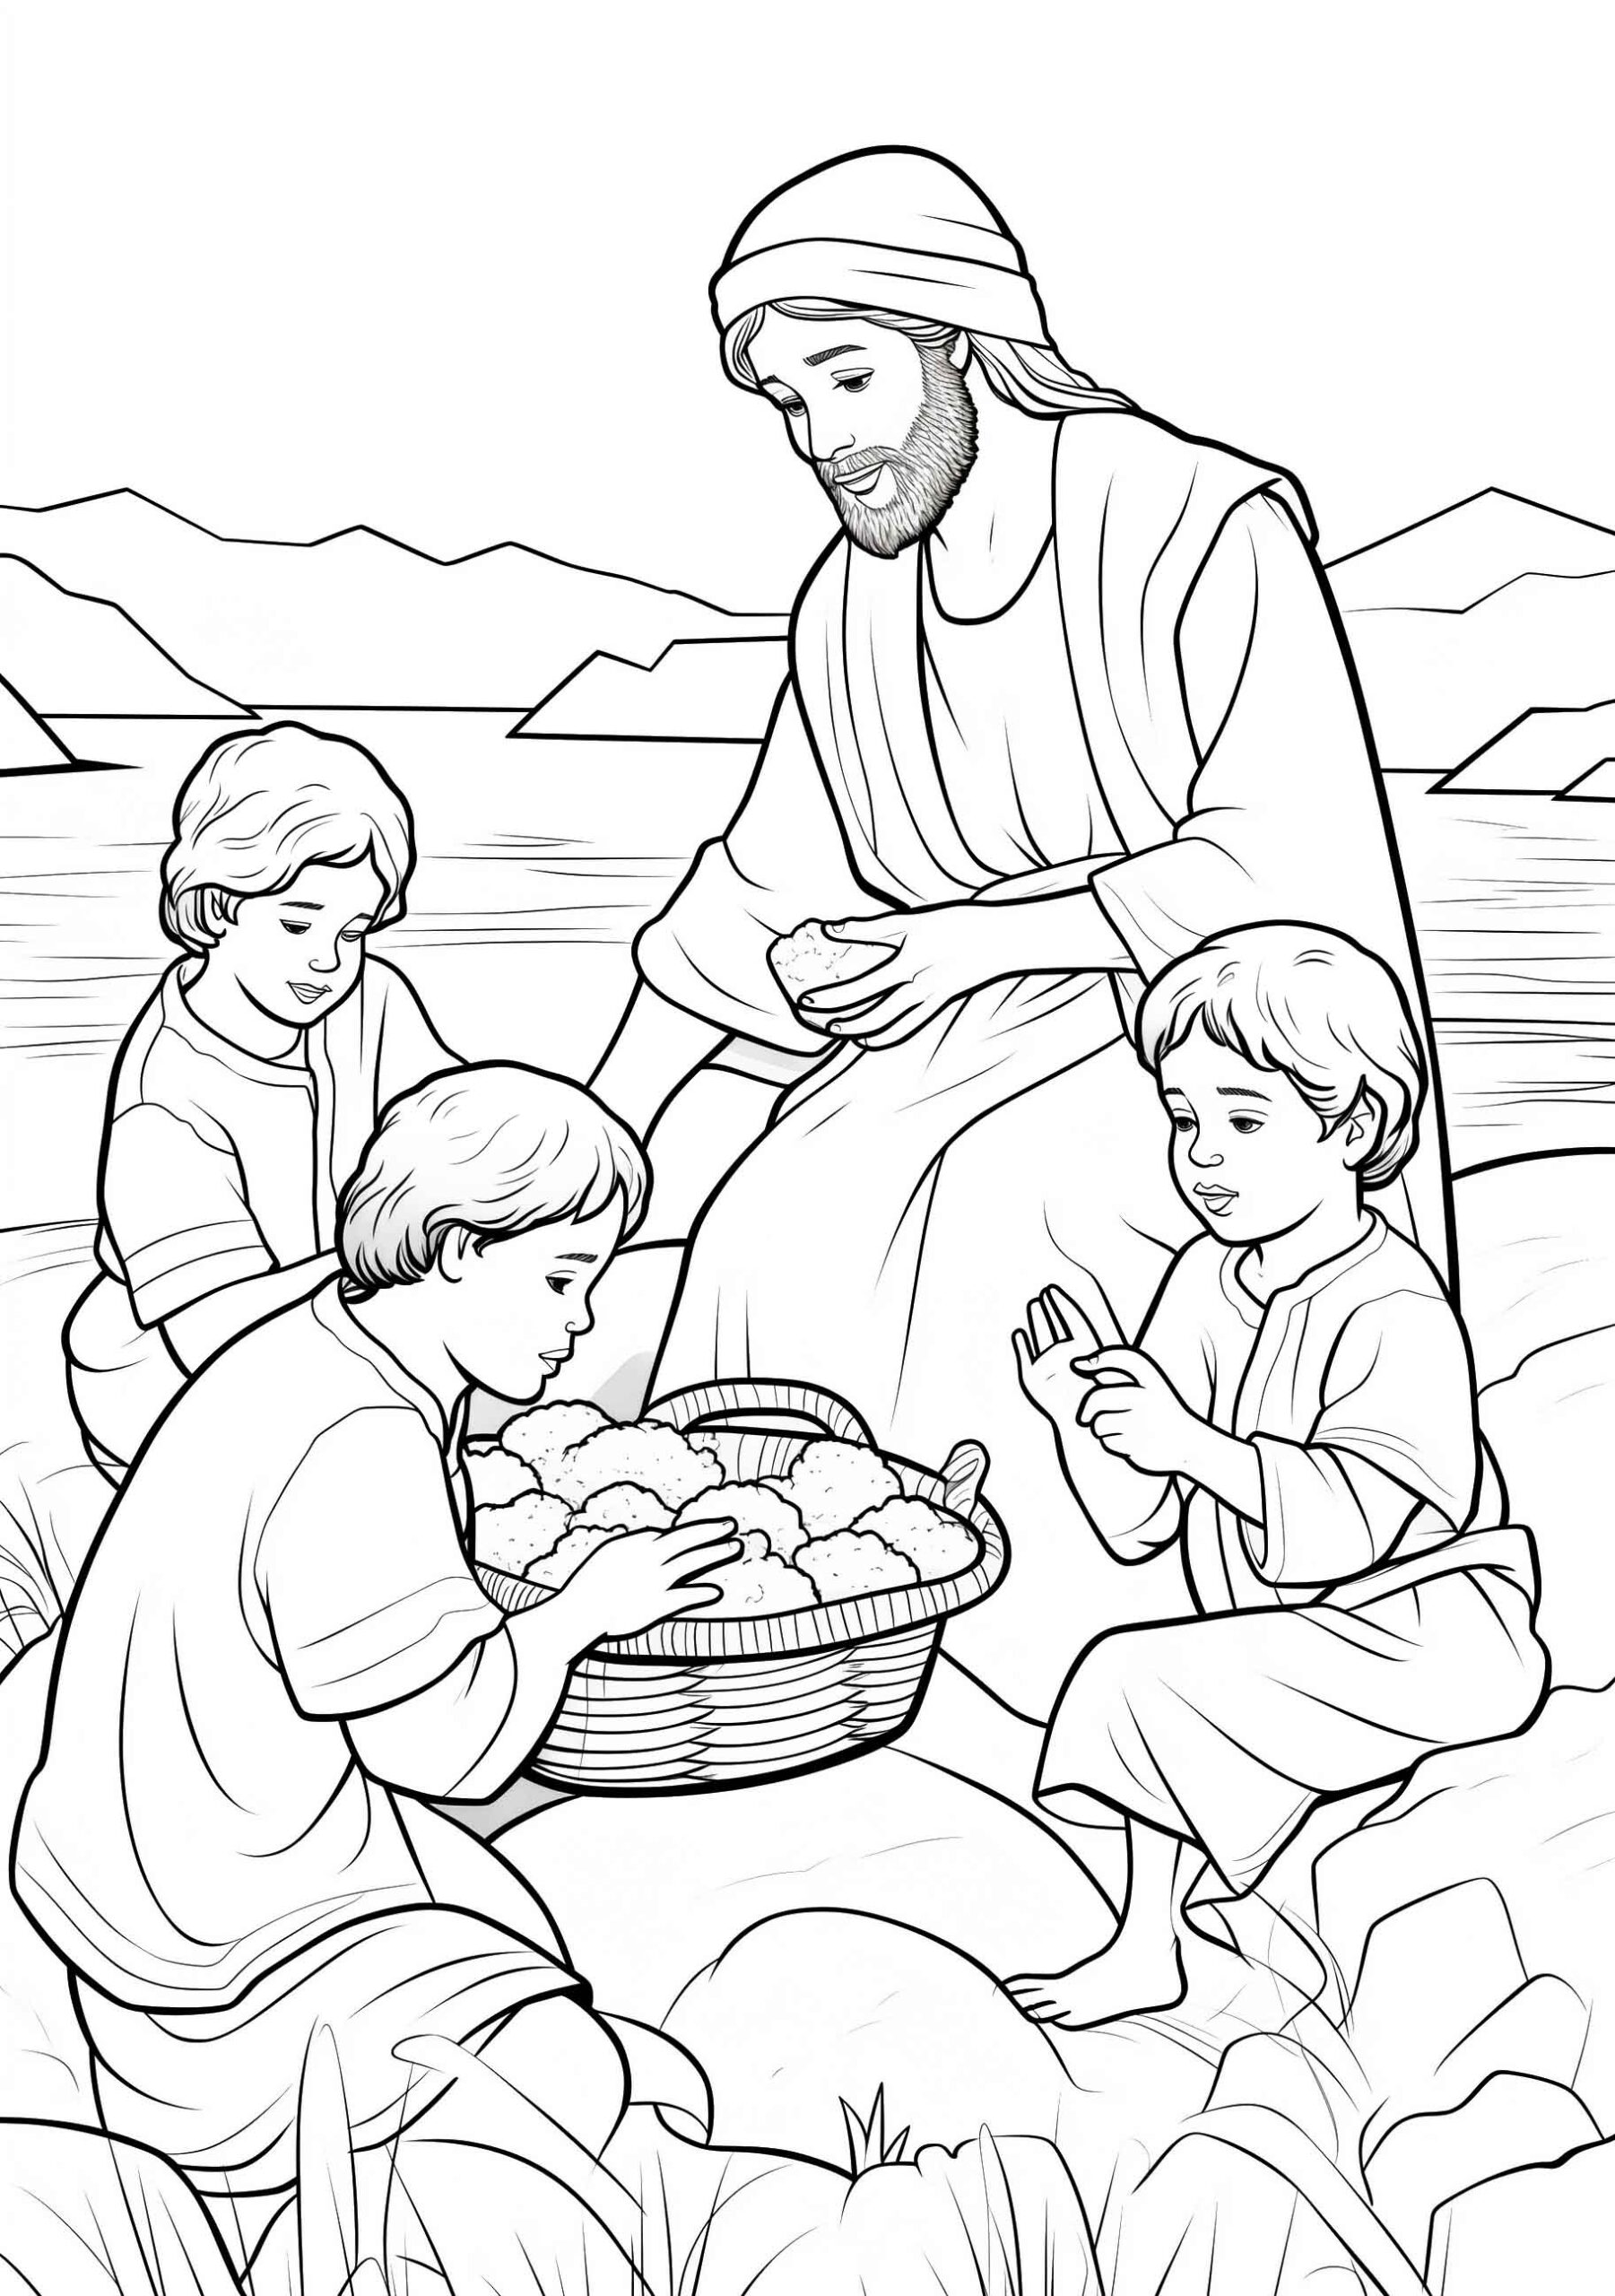 Jesus sharing food with children by the lakeside in a Jesus Feeds 5000 coloring page